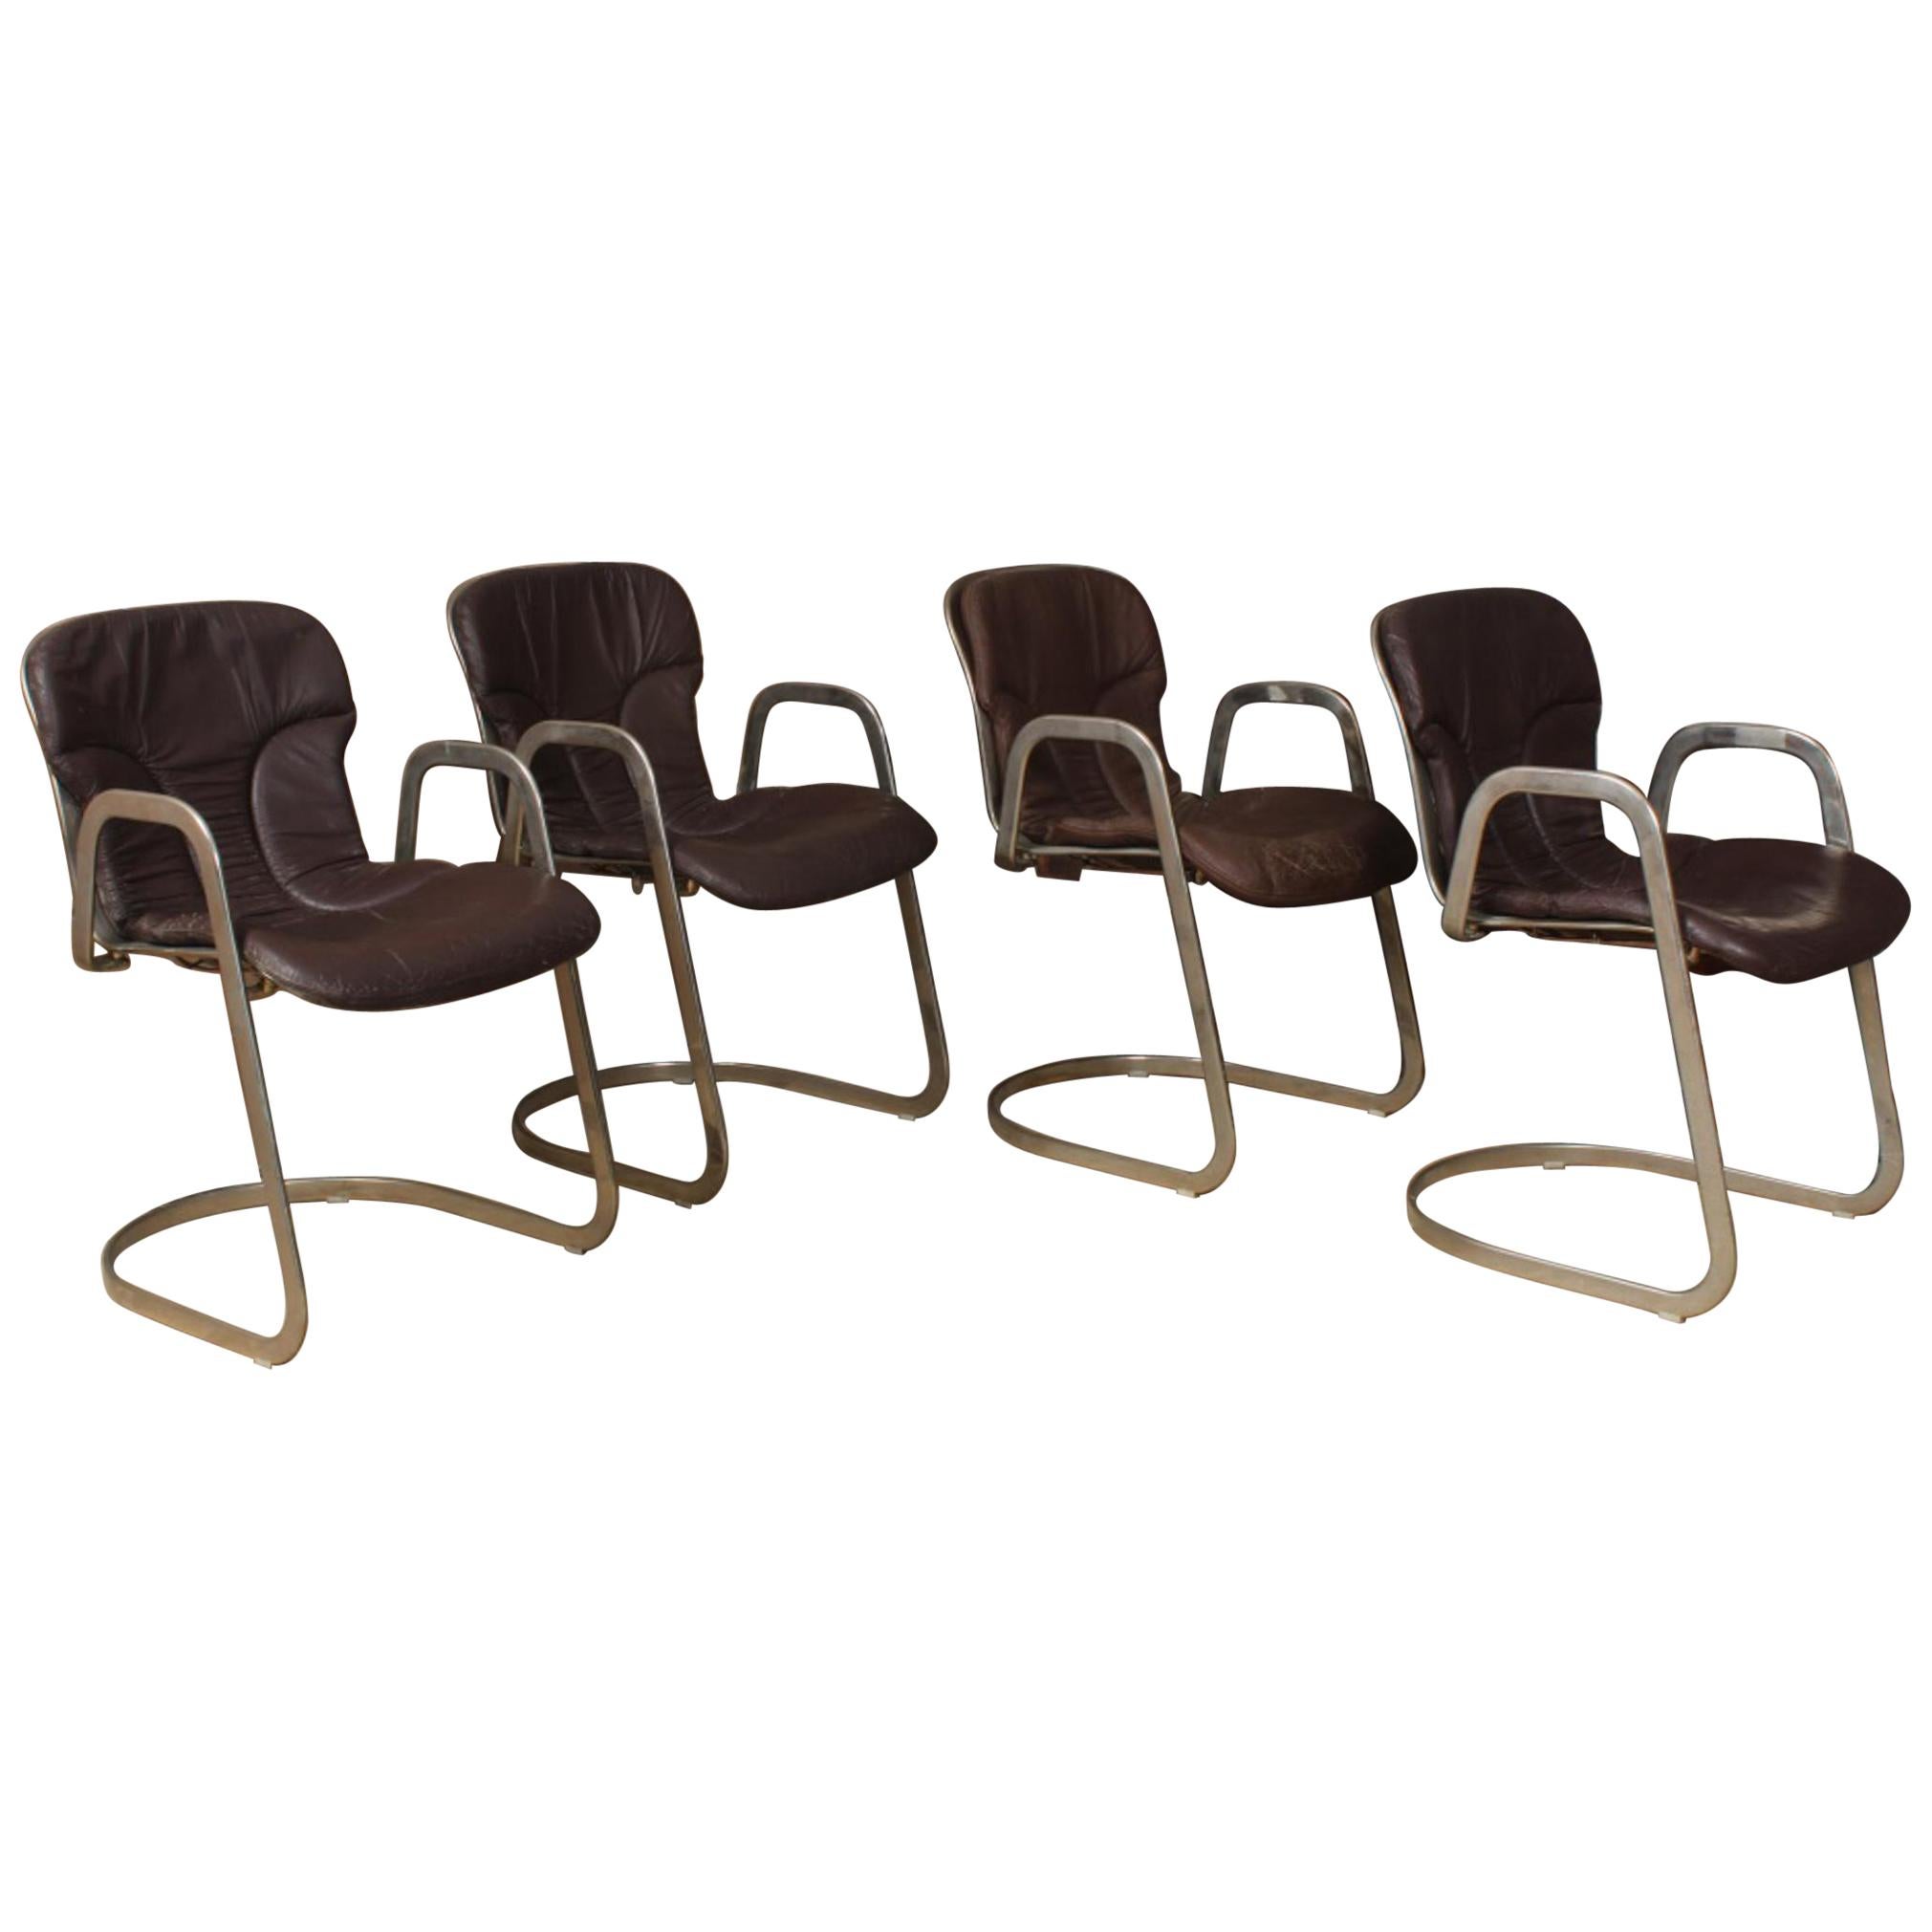 Willy Rizzo for Cidue Italia Postmodern chrome and leather dining side armchairs. Rare midcentury sculptural stainless steel cantilever armchairs with original leather cushions. Labeled. Listing is for set of four.